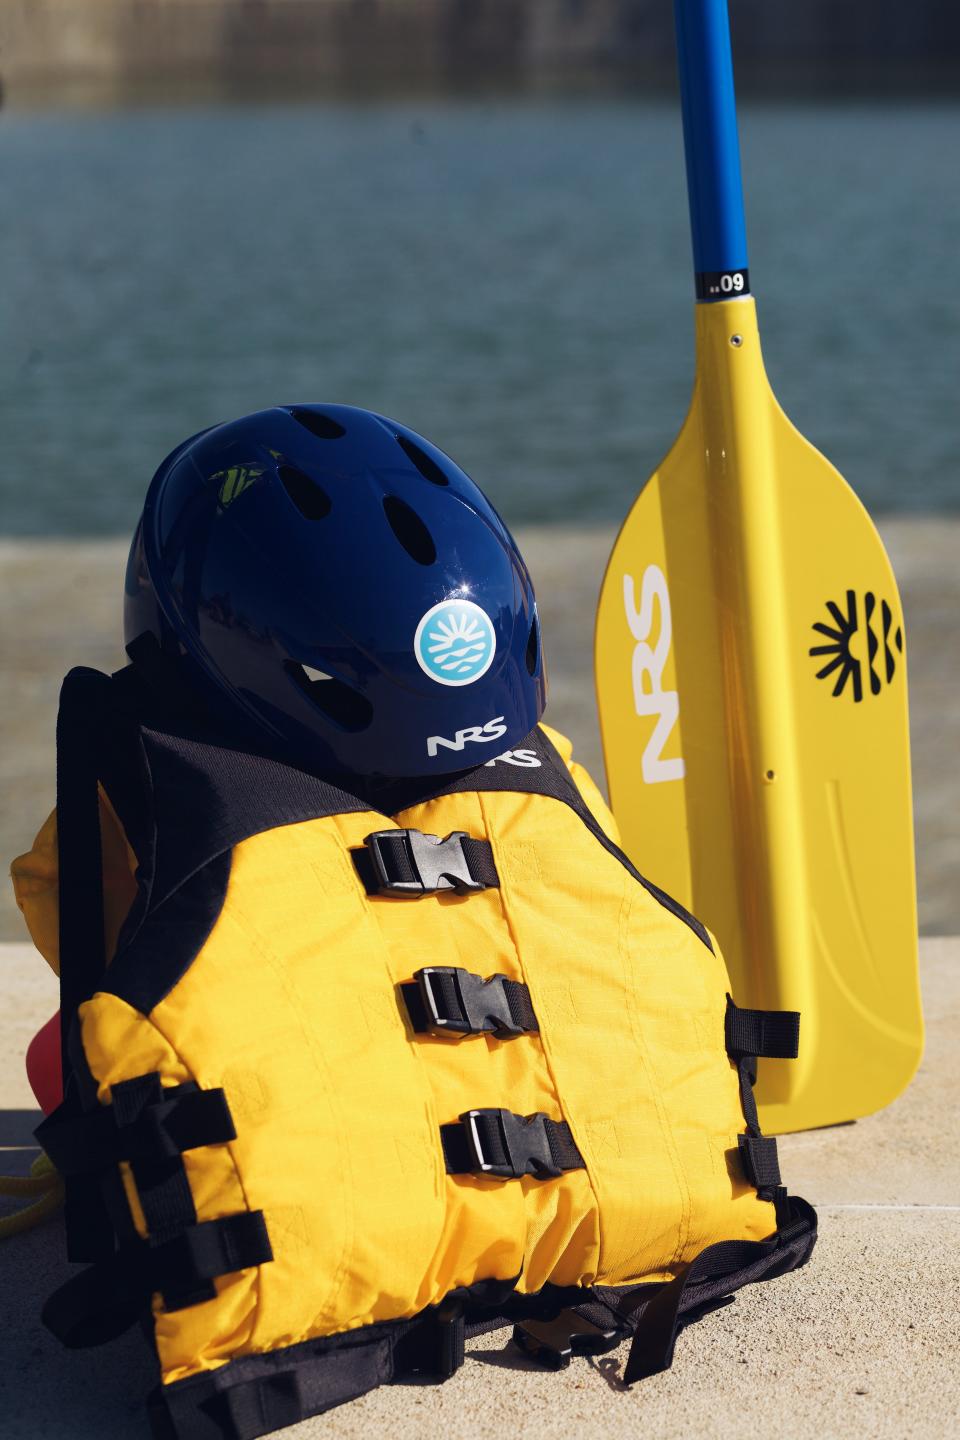 Montgomery Whitewater visitors who participate in the rafting activity will use this gear.